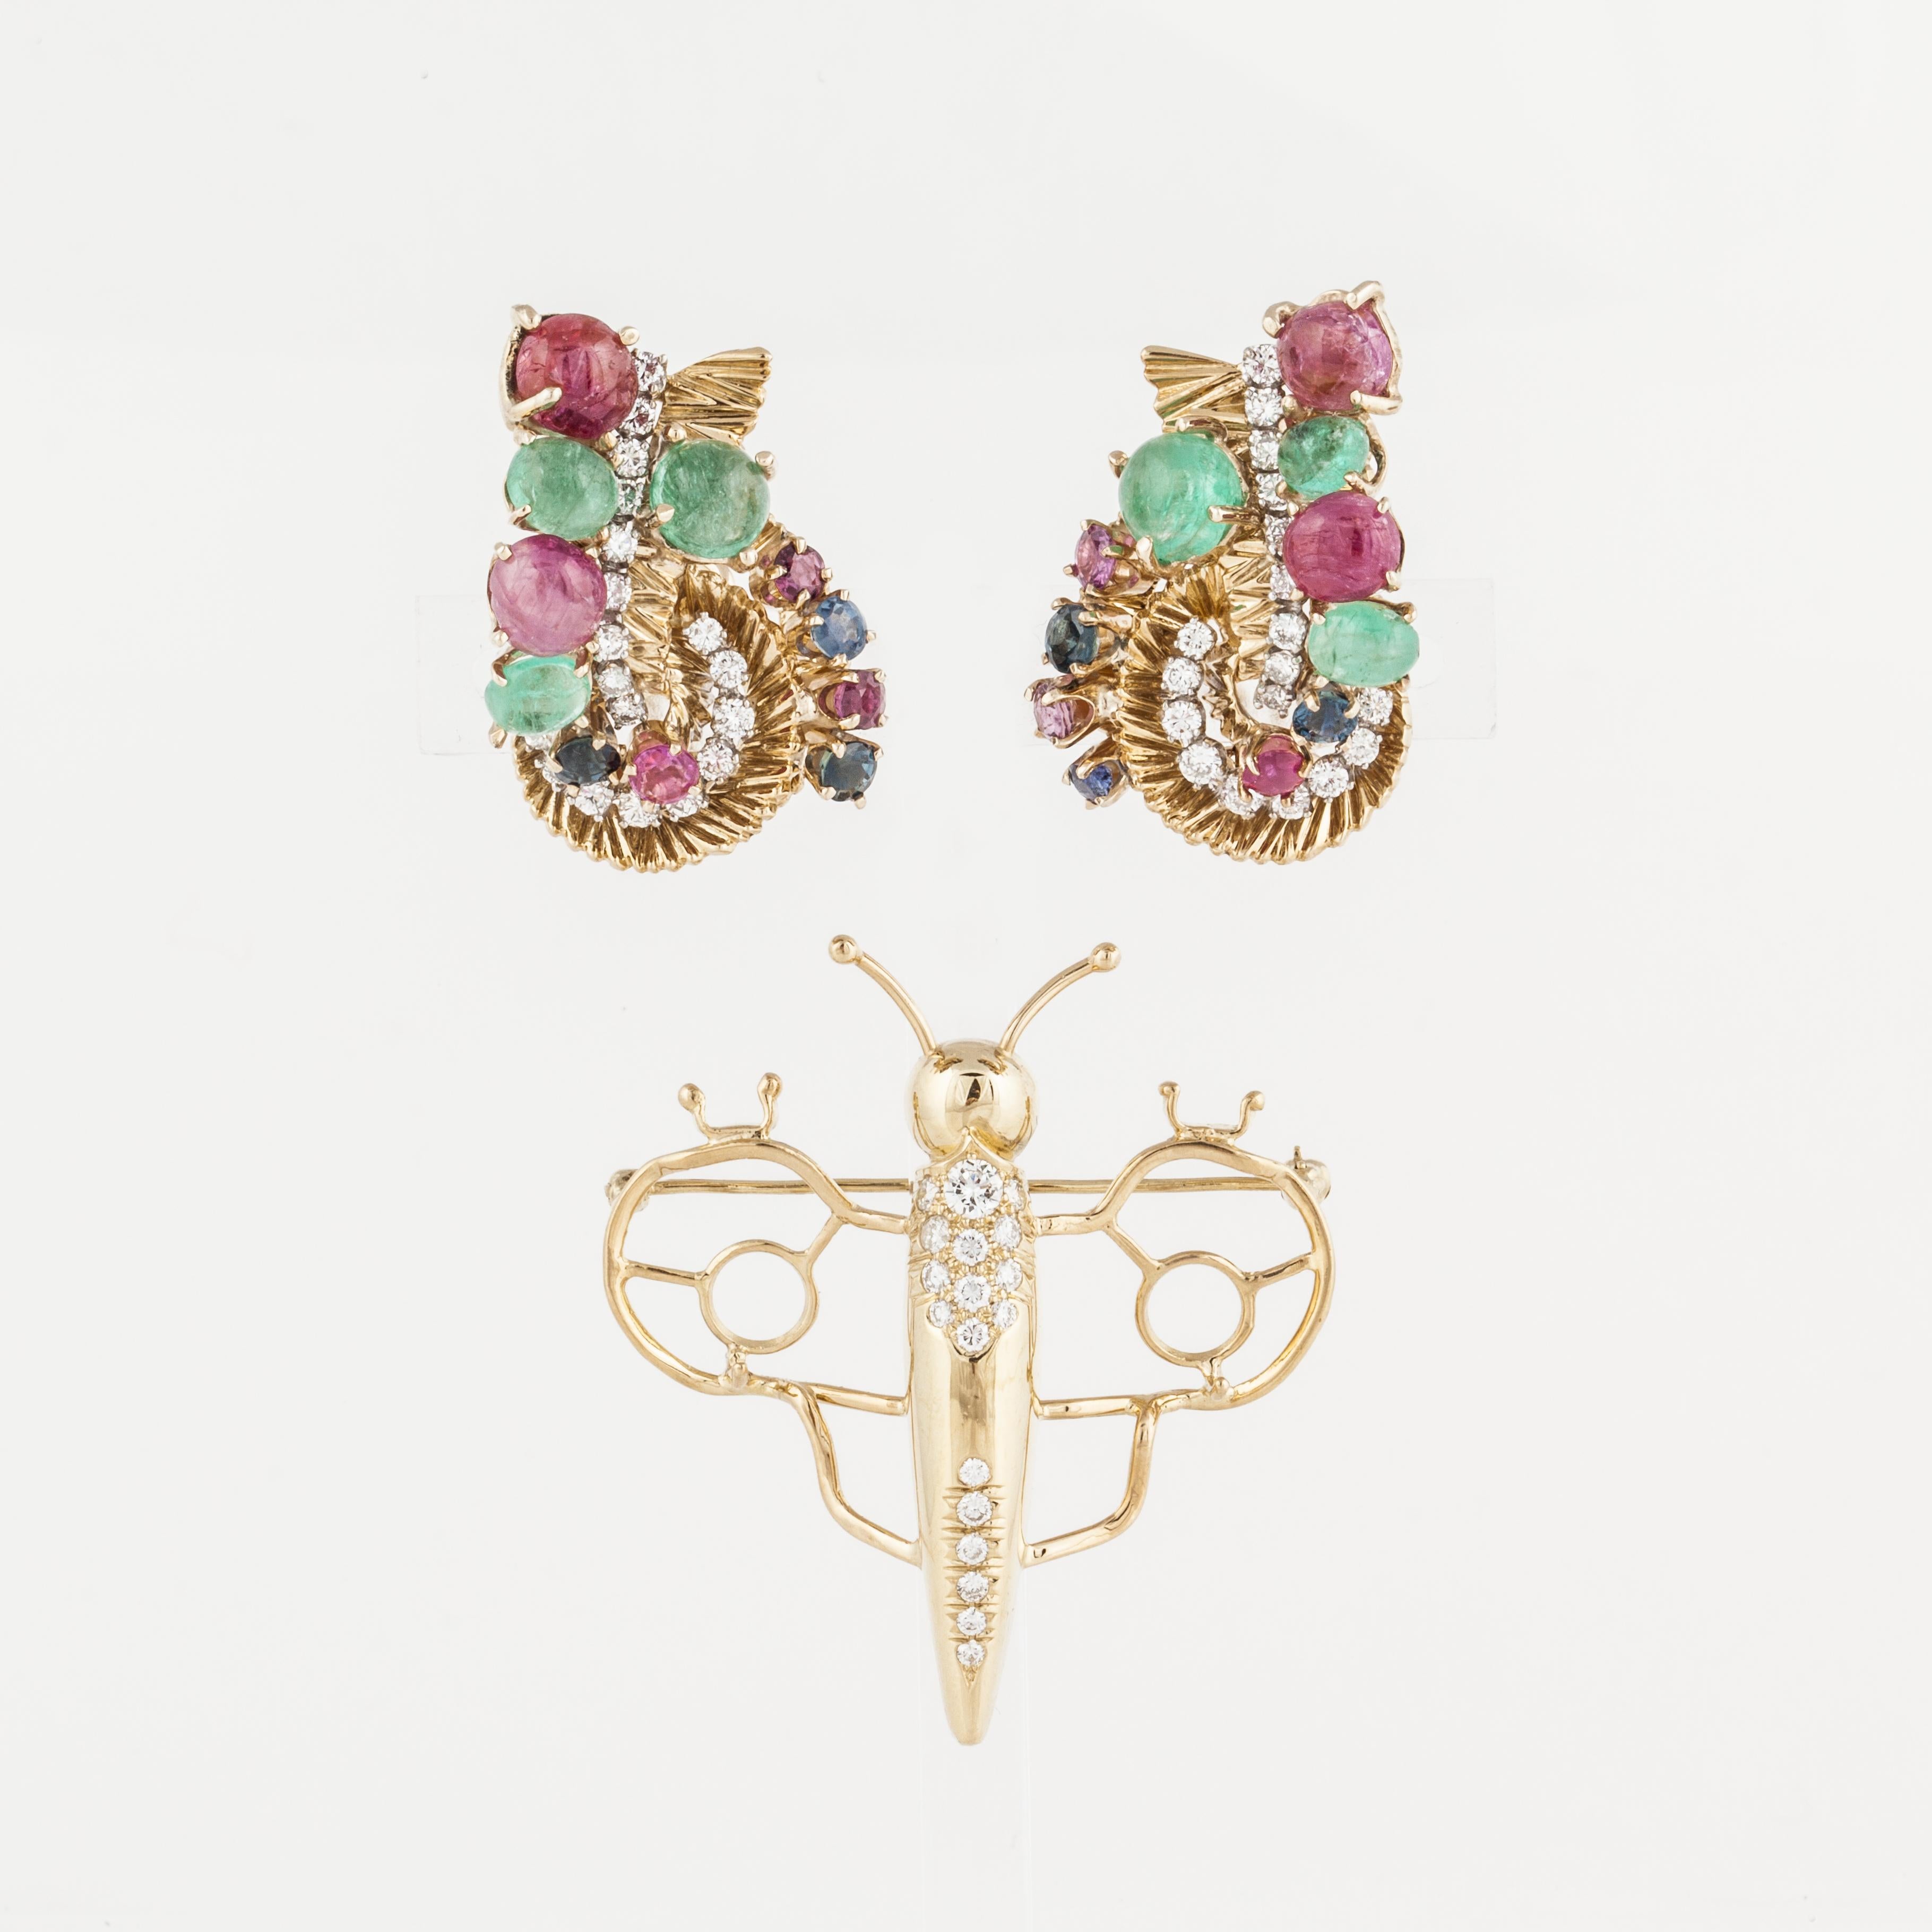 Mixed Cut Multi-Gemstone and Diamond 18K Gold Butterfly Convertible Brooch/Earrings